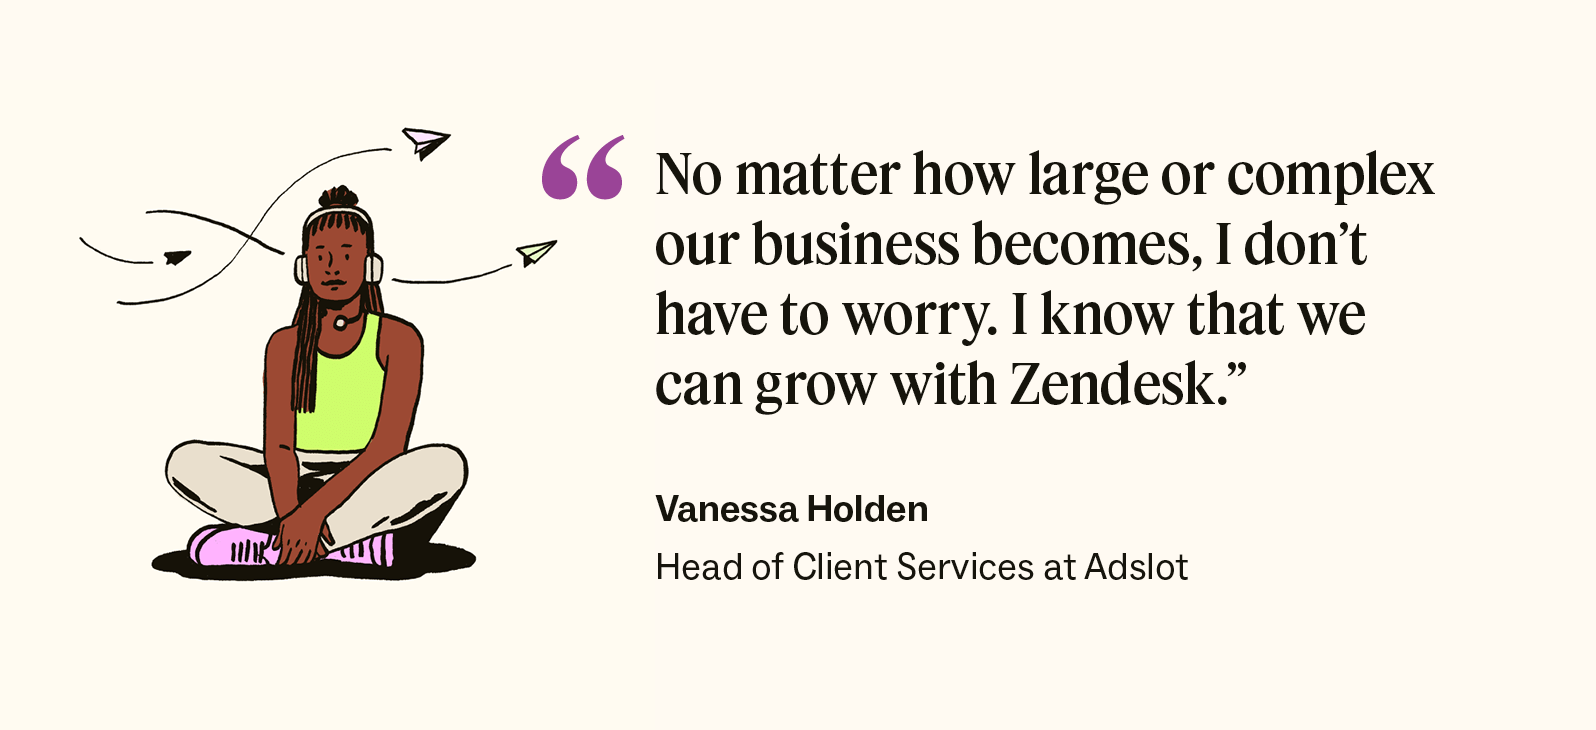 Adslot's Head of Client Services quote